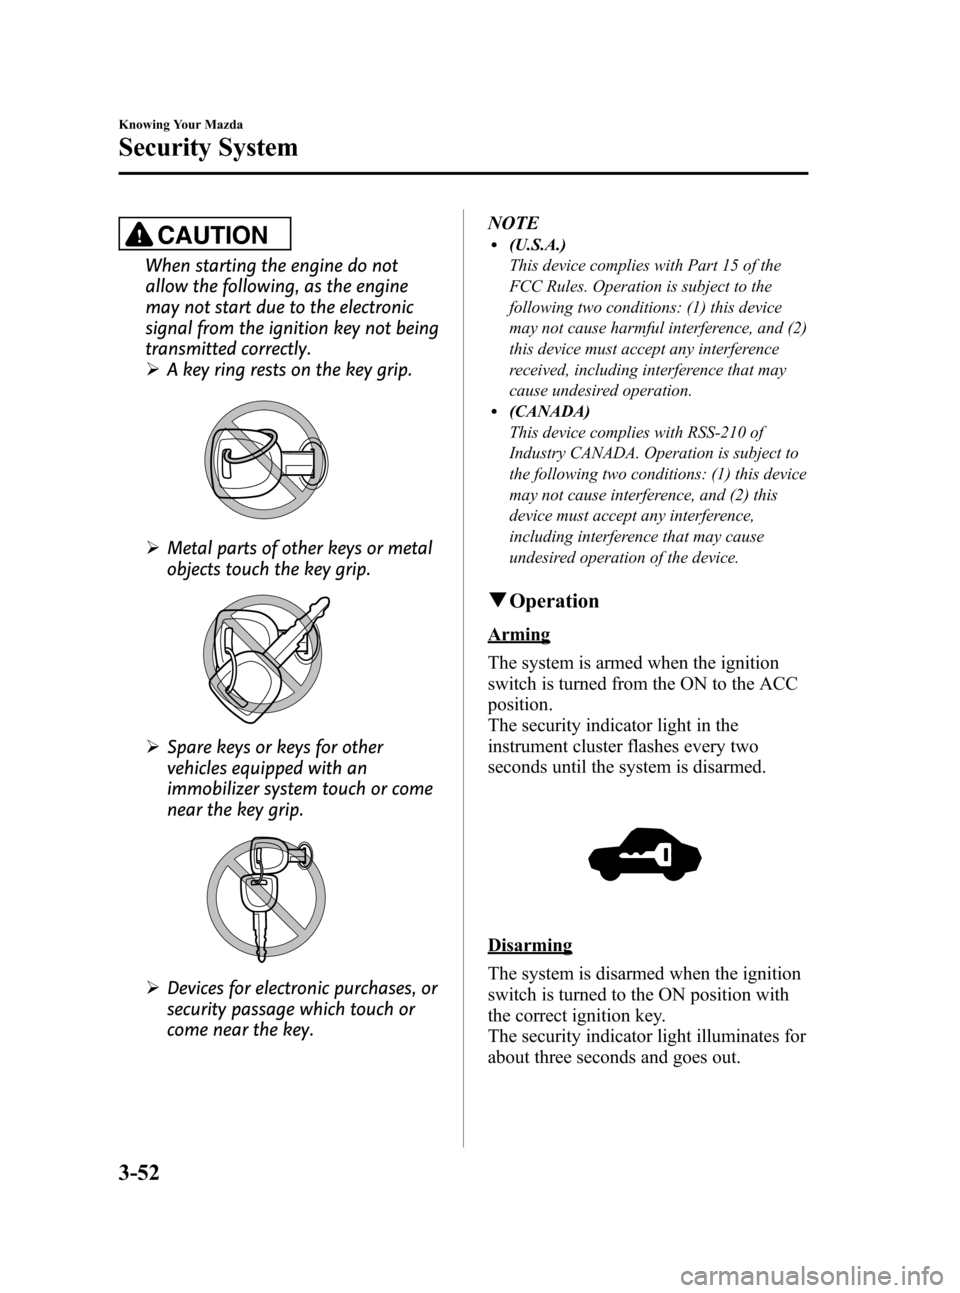 MAZDA MODEL CX-7 2009  Owners Manual (in English) Black plate (130,1)
CAUTION
When starting the engine do not
allow the following, as the engine
may not start due to the electronic
signal from the ignition key not being
transmitted correctly.
ØA key